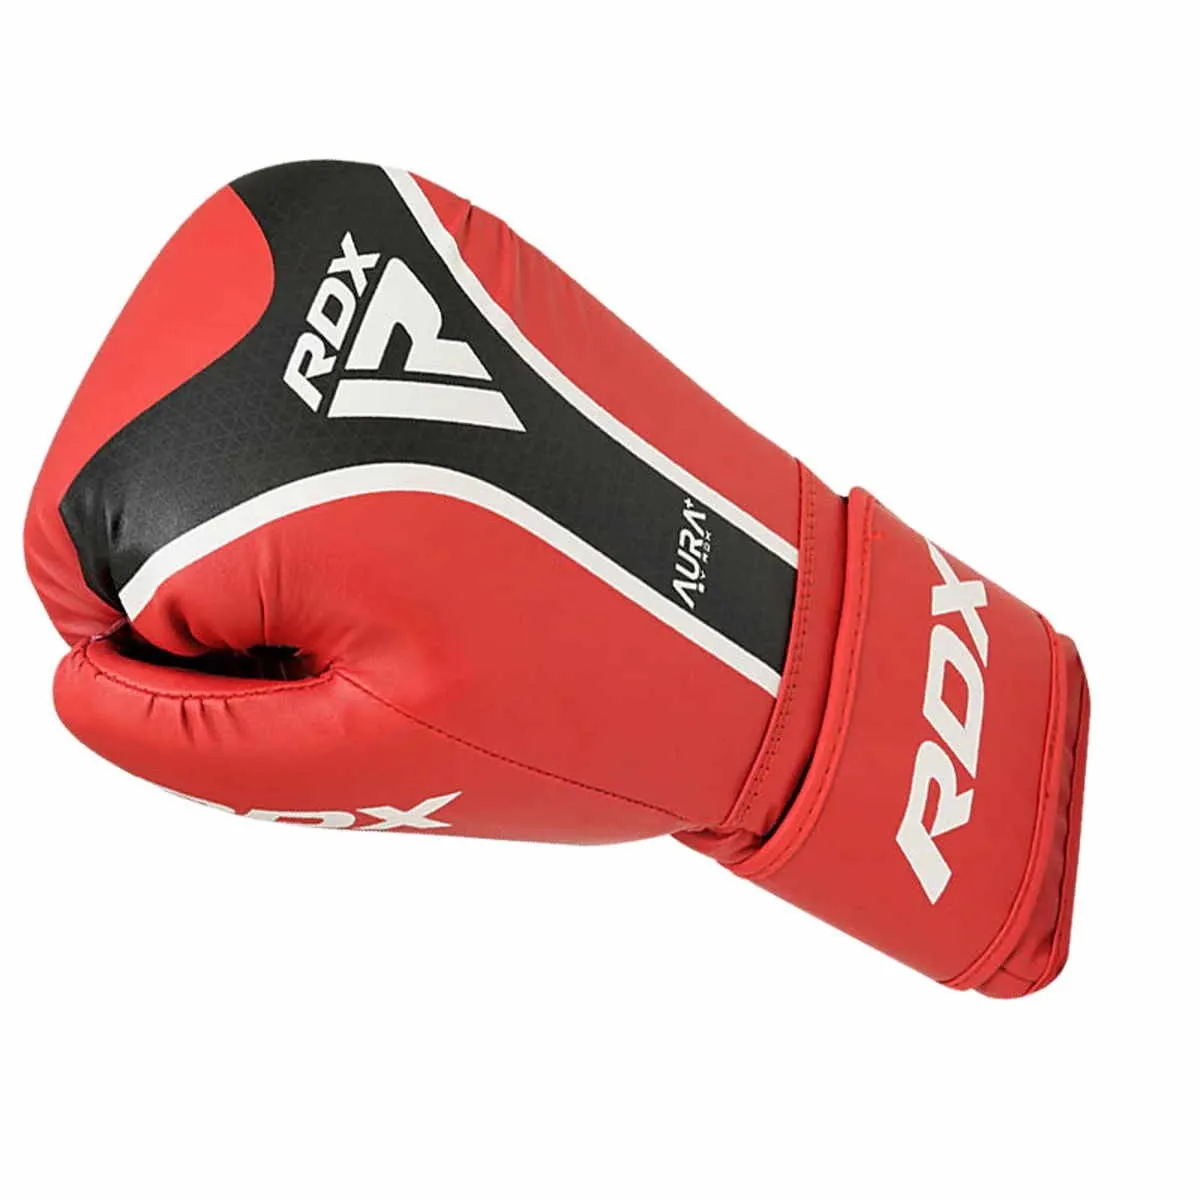 Boxing gloves RDX Aura Plus red